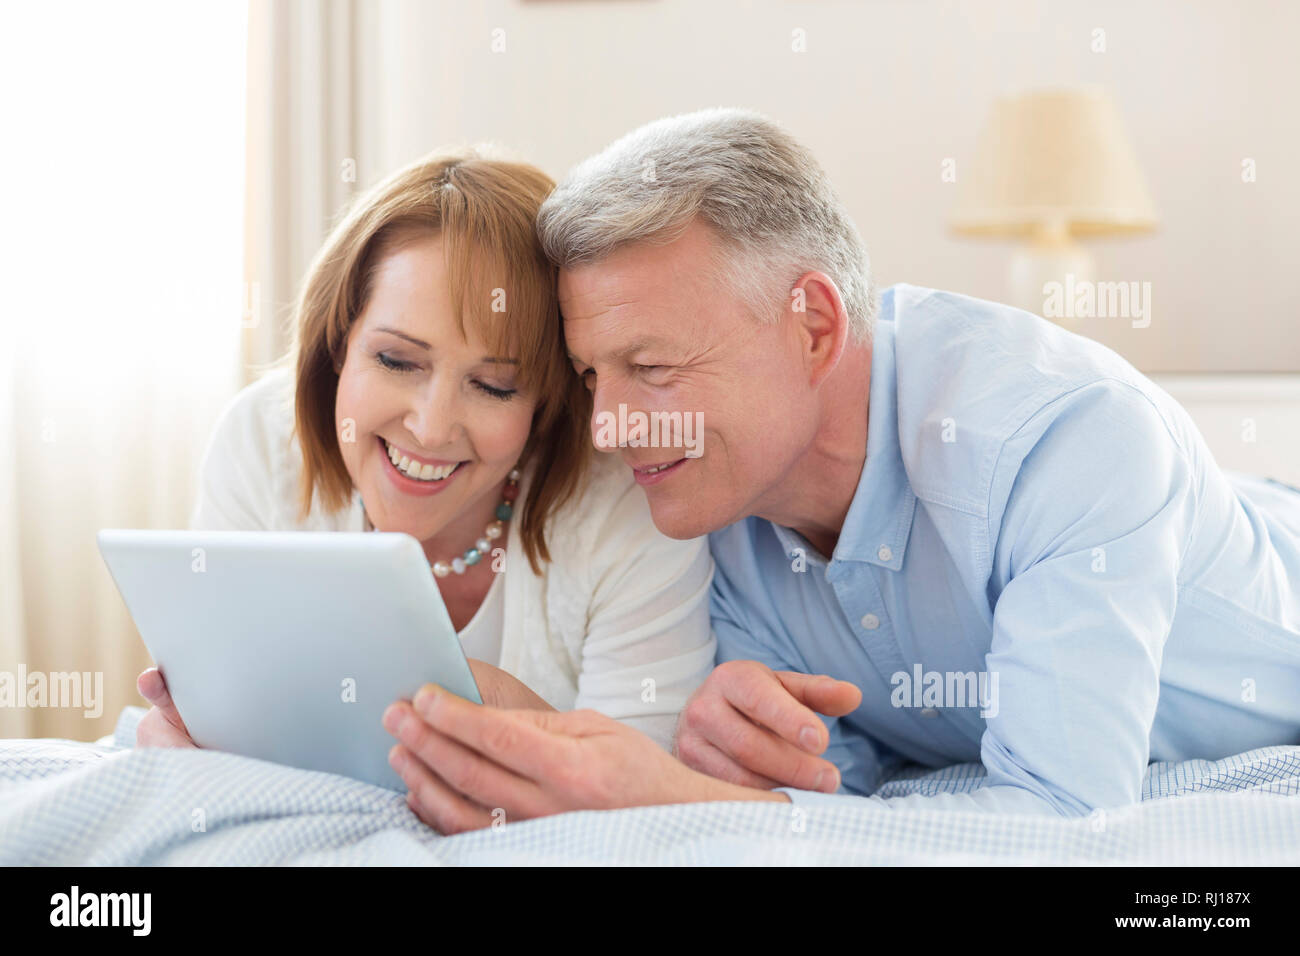 Smiling mature couple sharing digital tablet while lying on bed at home Stock Photo